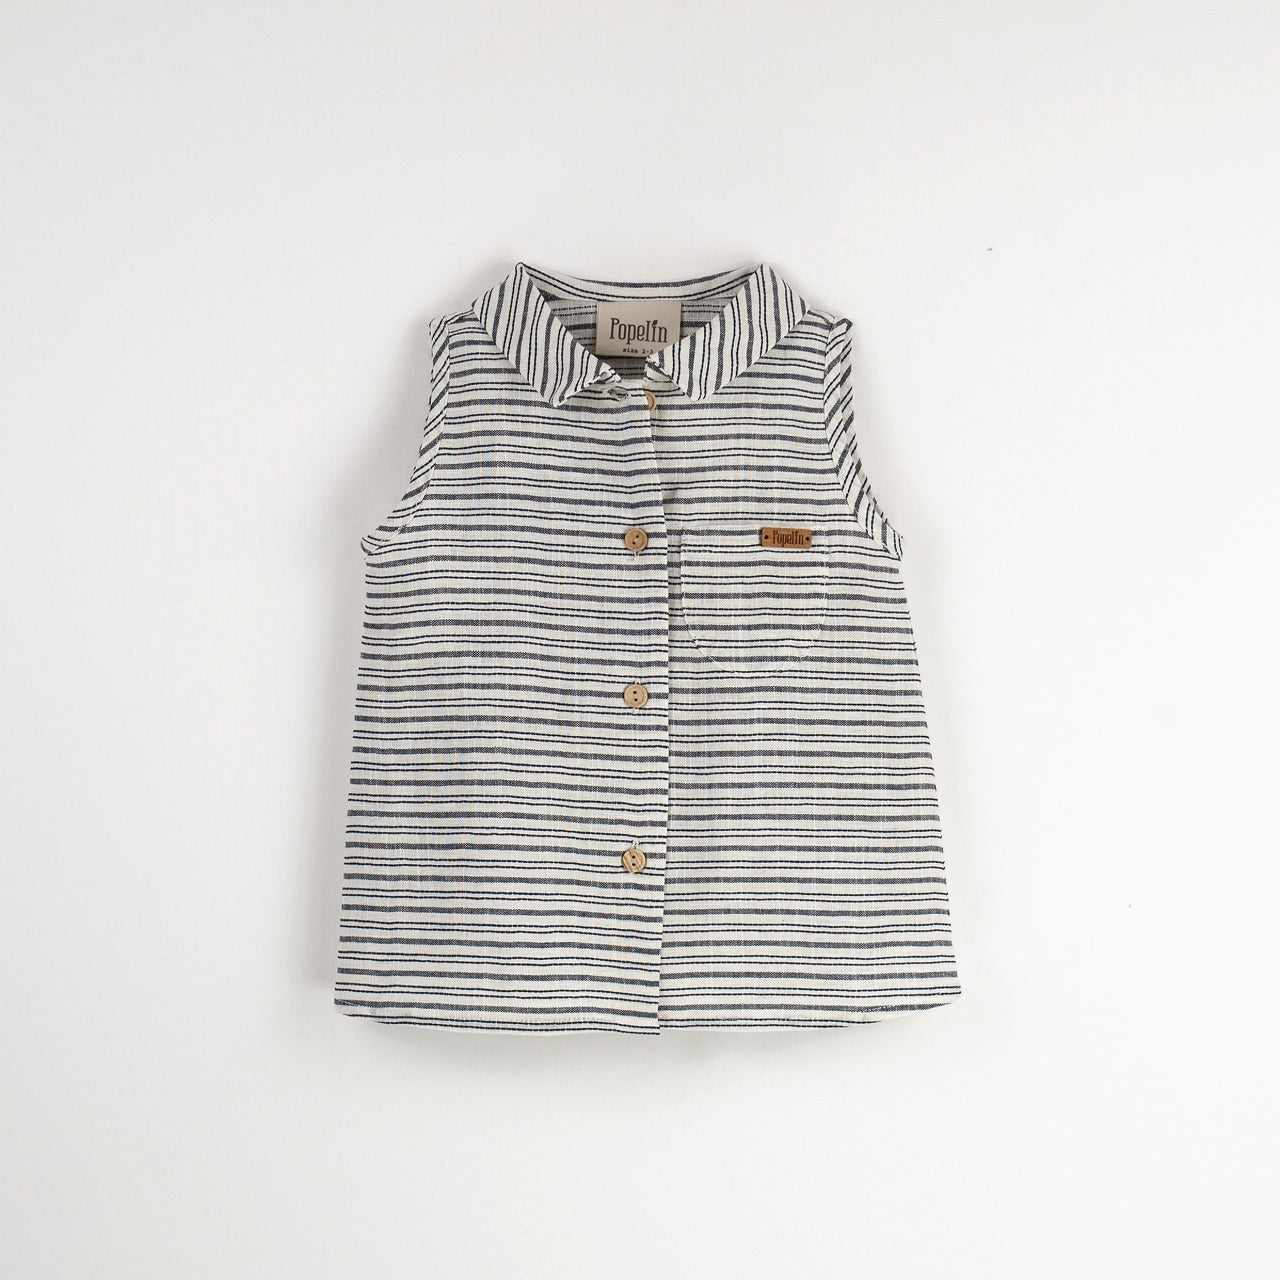 【Popelin】【30%OFF】Embroidered striped sleeveless shirt ノースリーブシャツ 12/18m,18/24m,2/3y,3/4y  | Coucoubebe/ククベベ